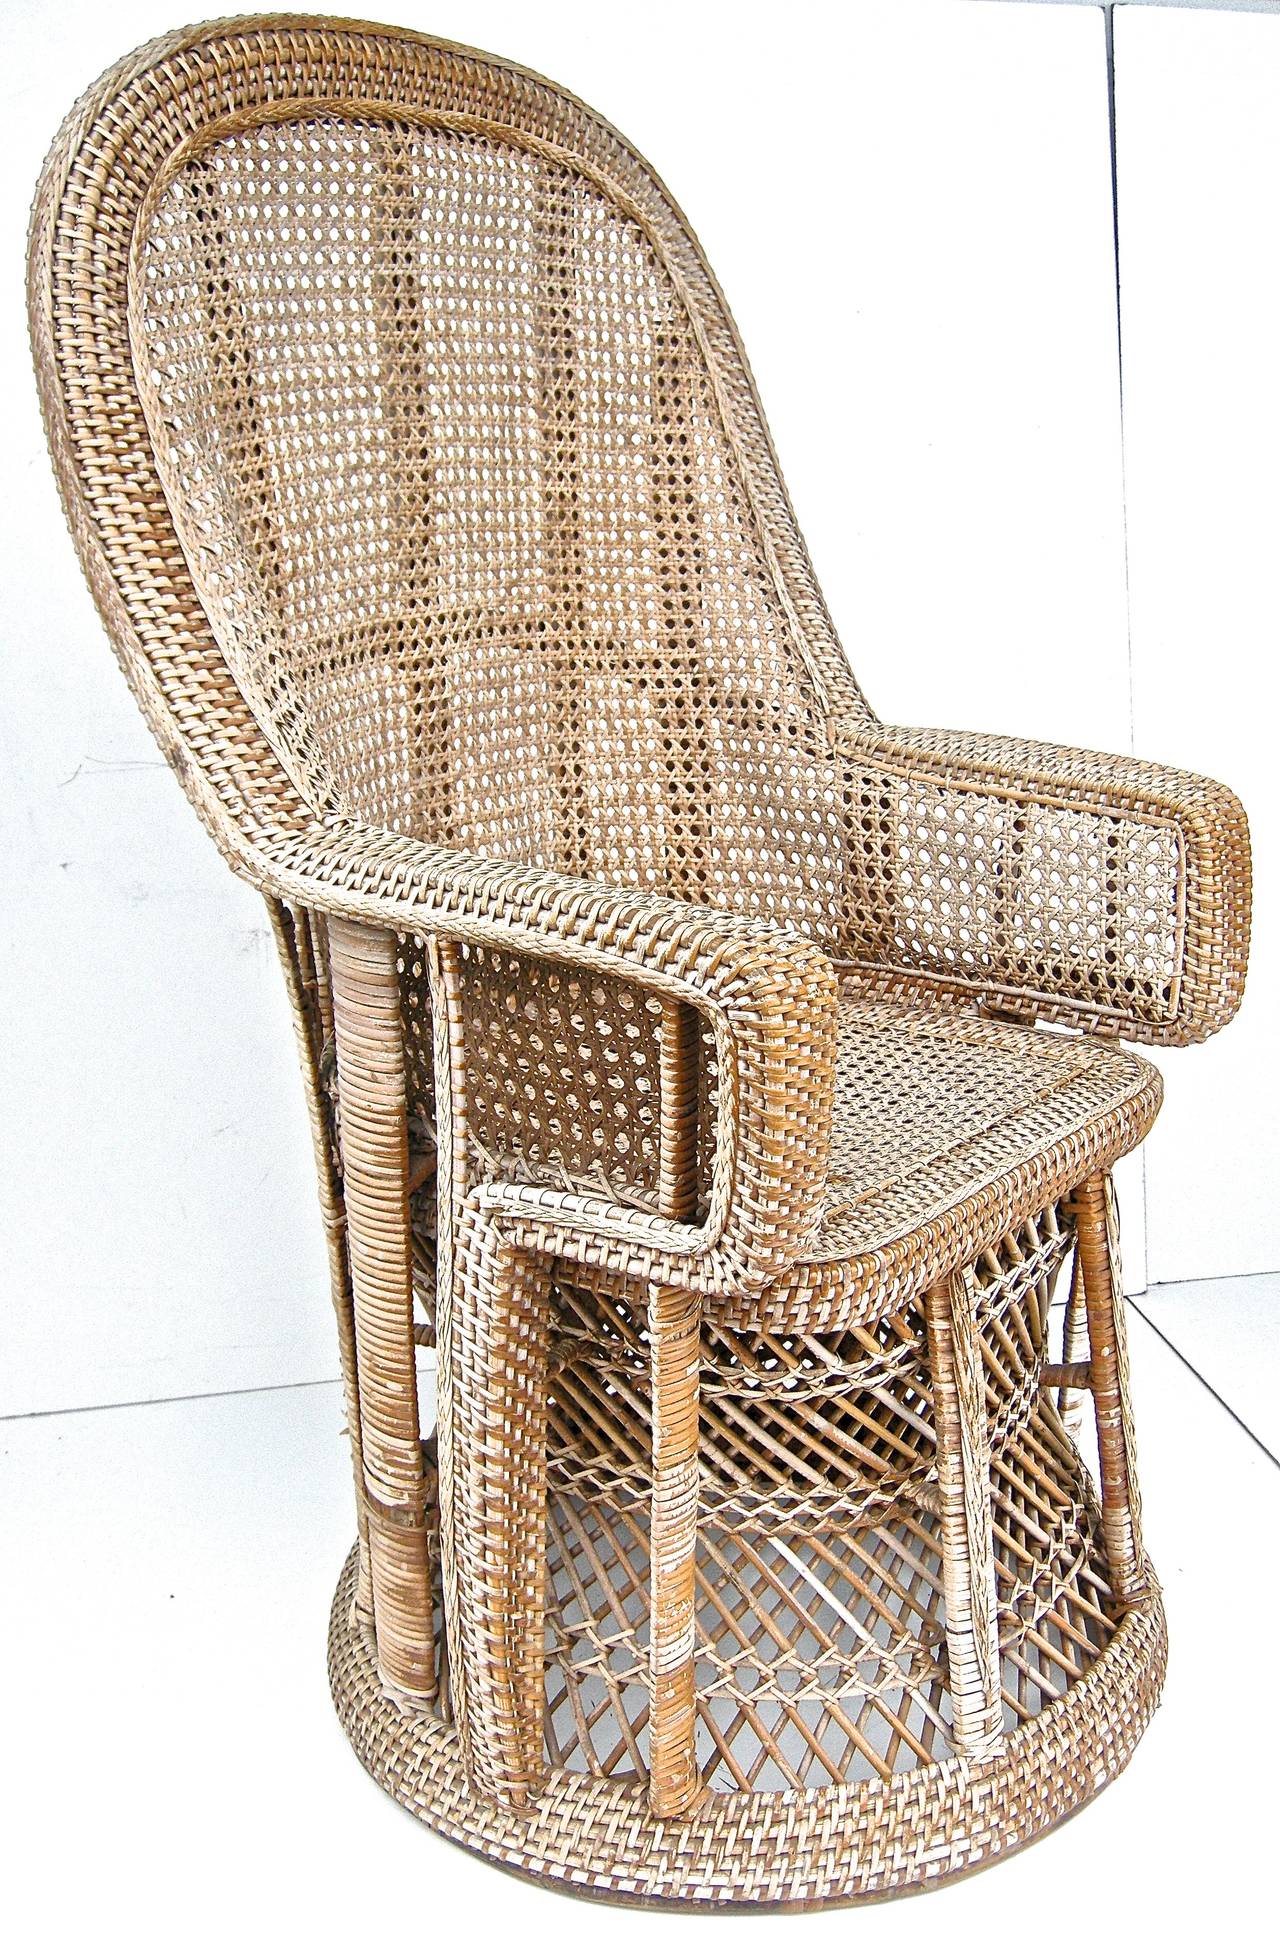 Moroccan Inspired Diminutive Wicker Armchairs In Good Condition For Sale In Cincinnati, OH